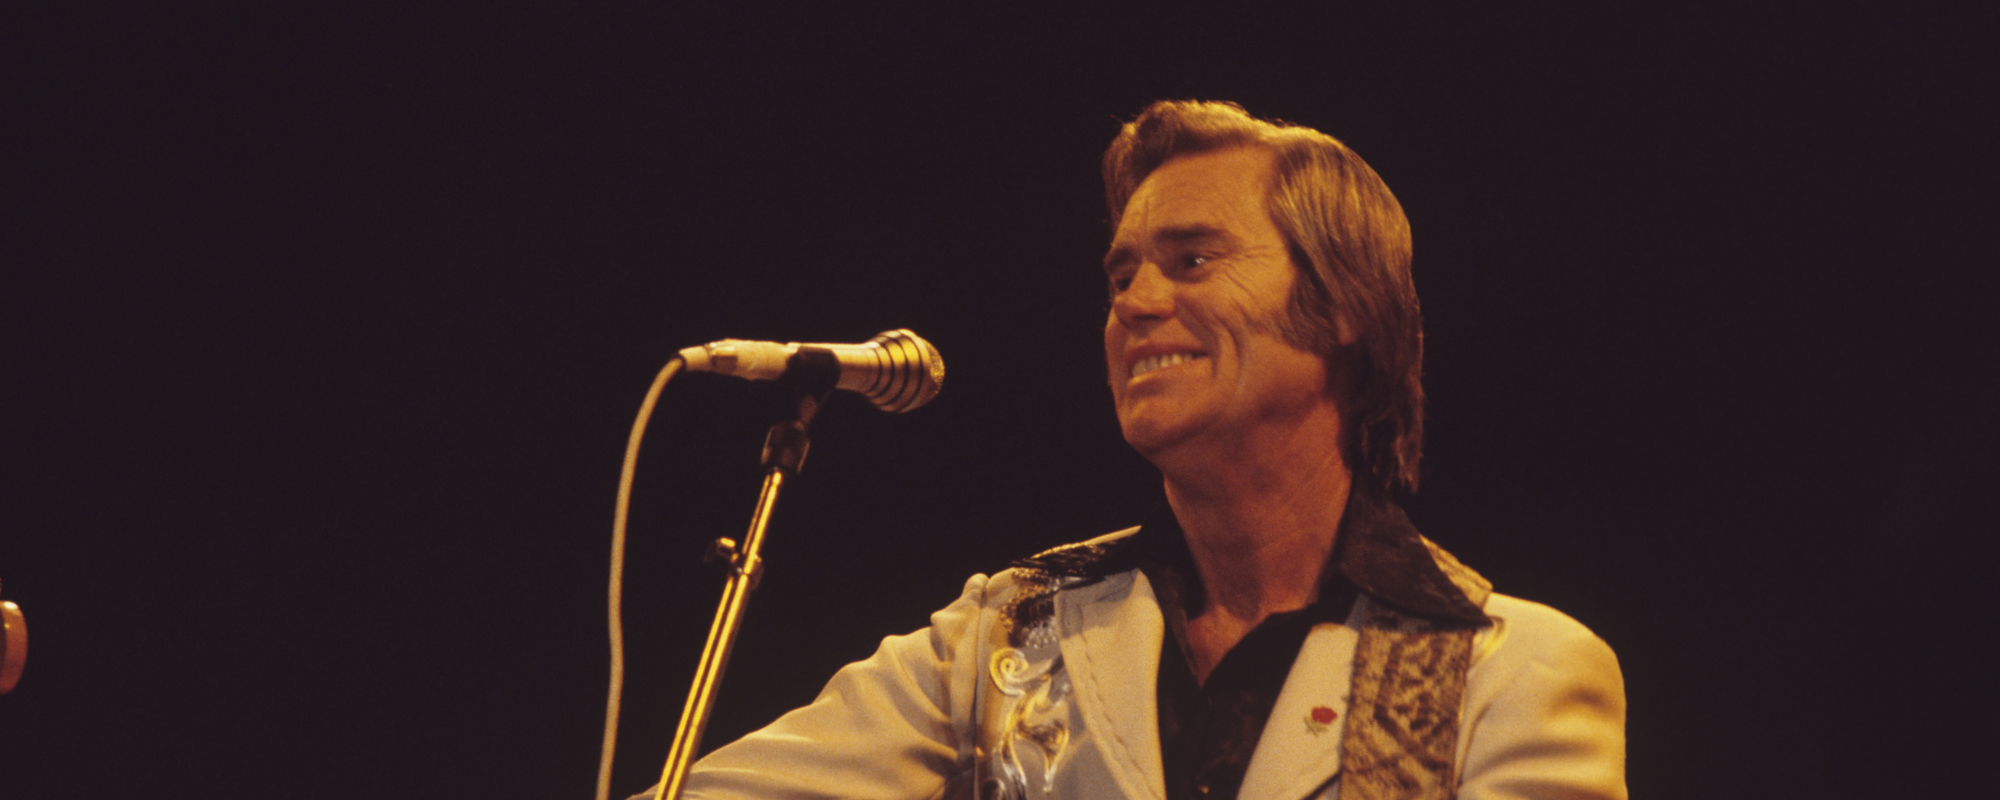 The Change-of-Heart Story Behind “She Thinks I Still Care” by George Jones